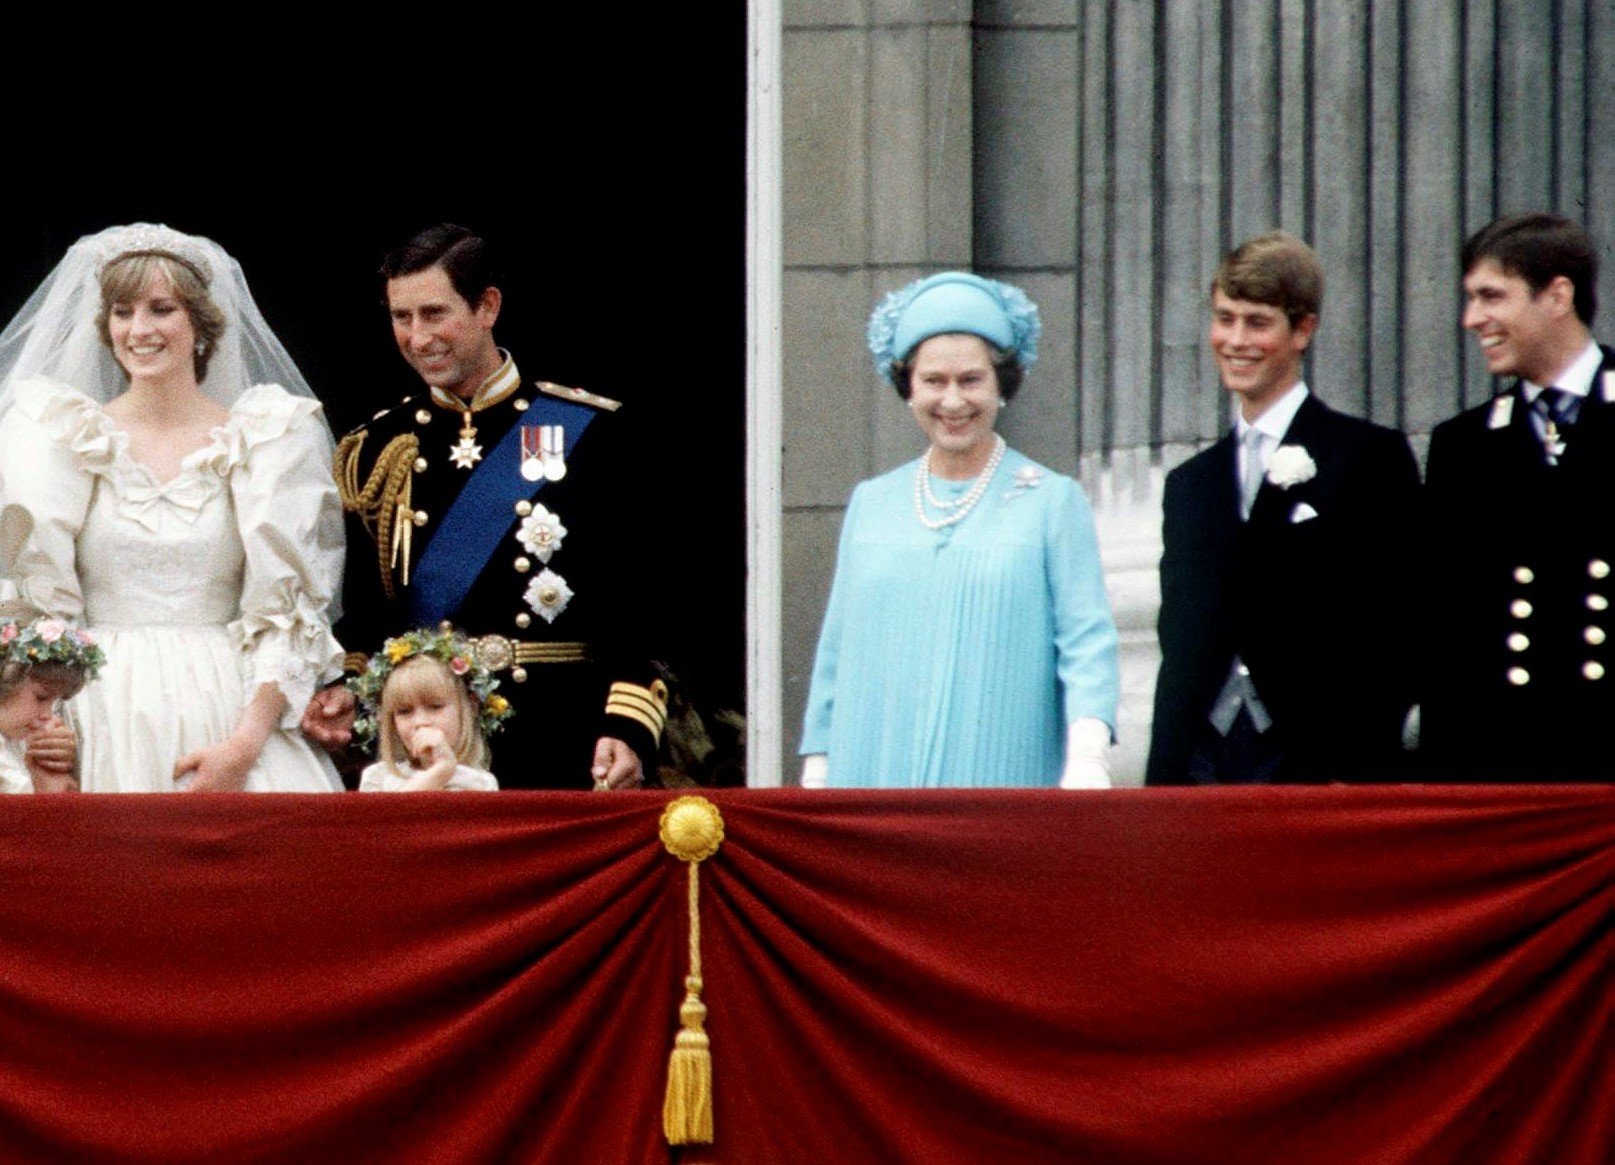 Prince Charles and Princess Diana with their bridesmaids, Queen Elizabeth II, Prince Edward, and Prince Andrew